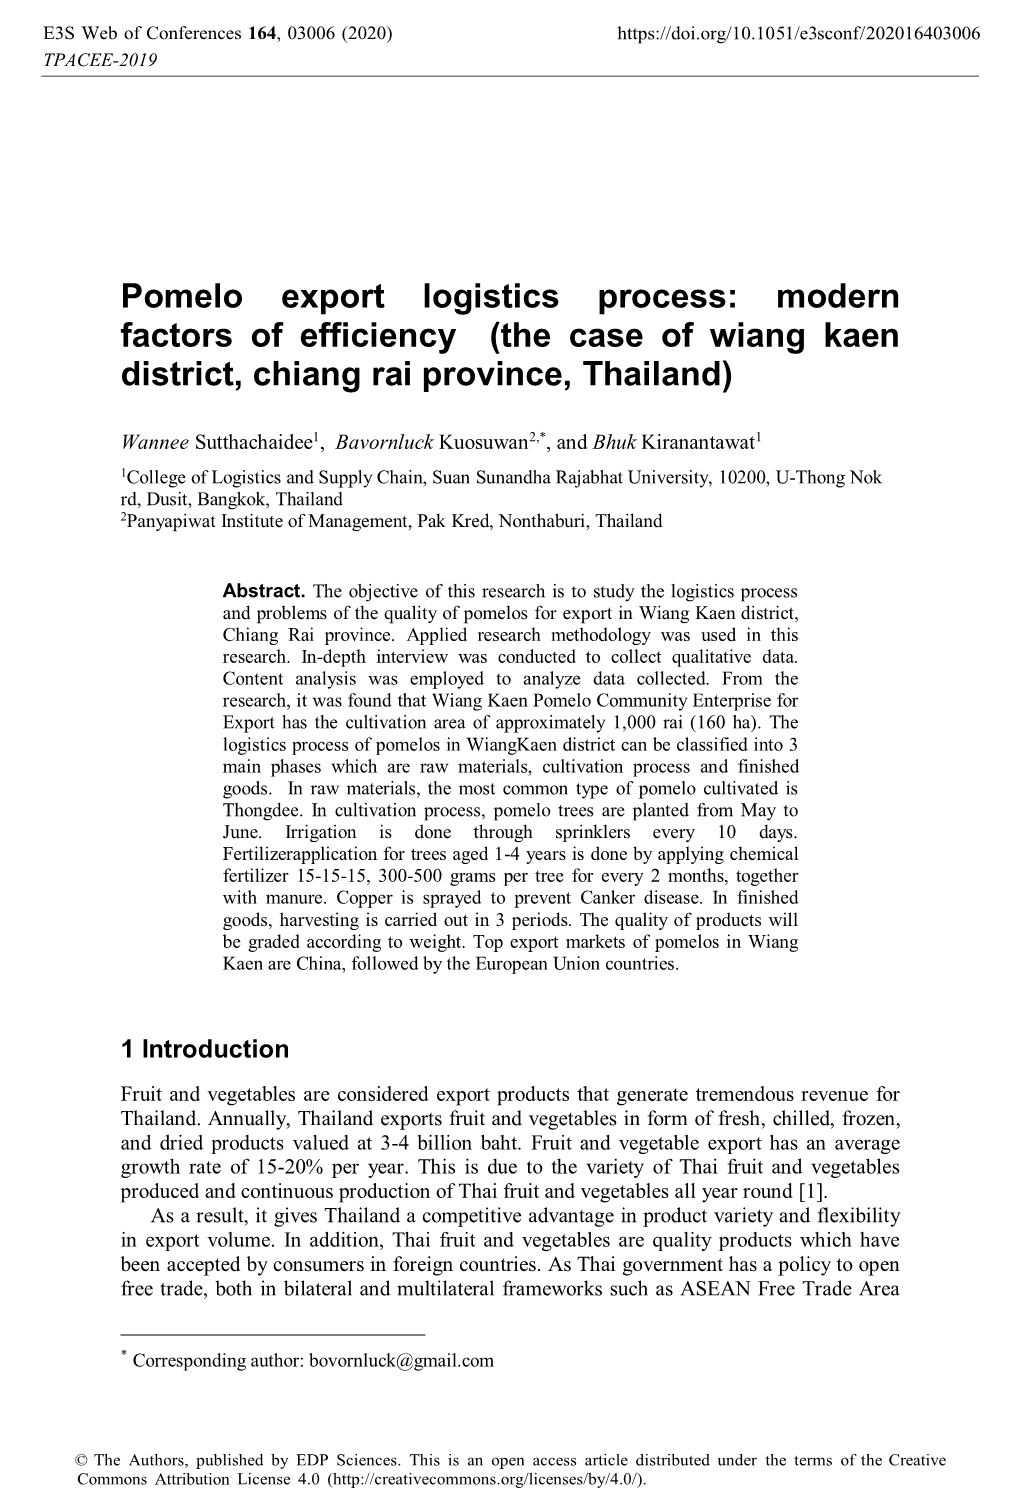 Pomelo Export Logistics Process: Modern Factors of Efficiency (The Case of Wiang Kaen District, Chiang Rai Province, Thailand)